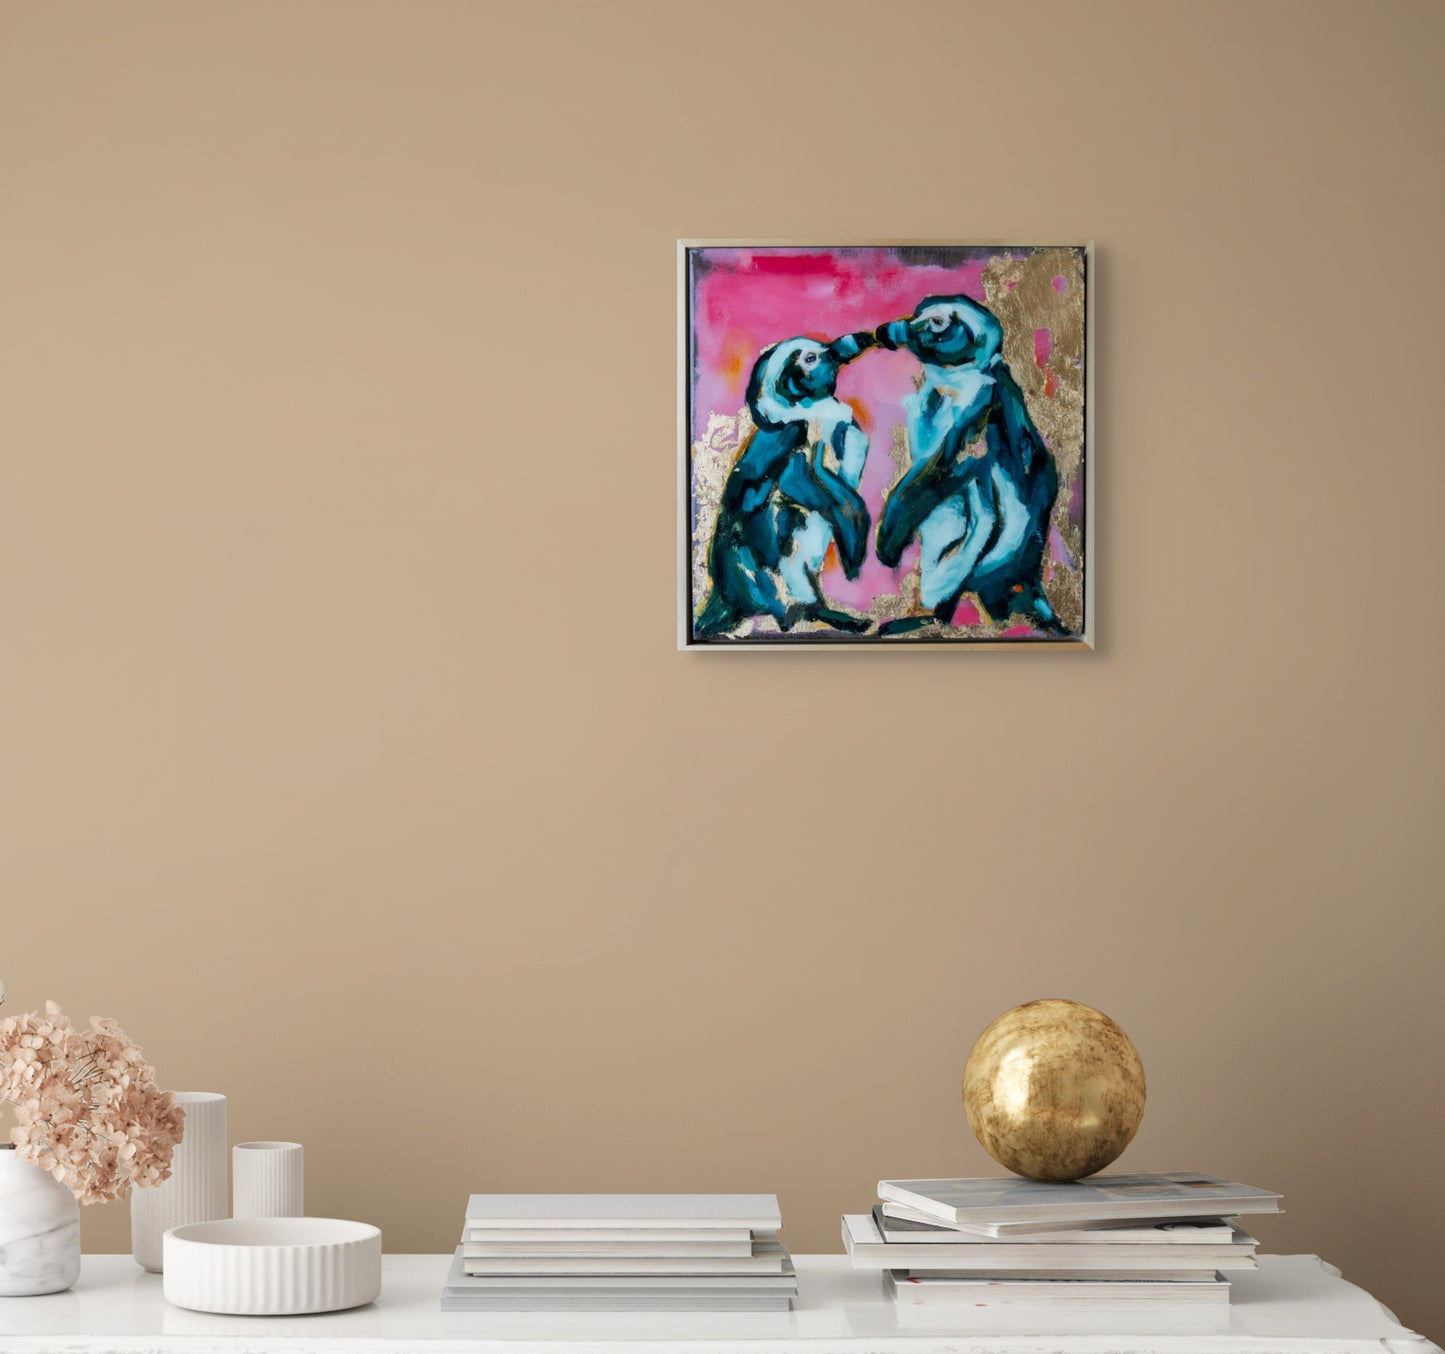 12.5"x12.5" painting of two Penguins is mixed media; using acrylic and oil, pencil, and gold leaf with glossy resin finish on surface; blues, pinks, and gold; artist Shaney Watters; has raw maple float frame; in situ